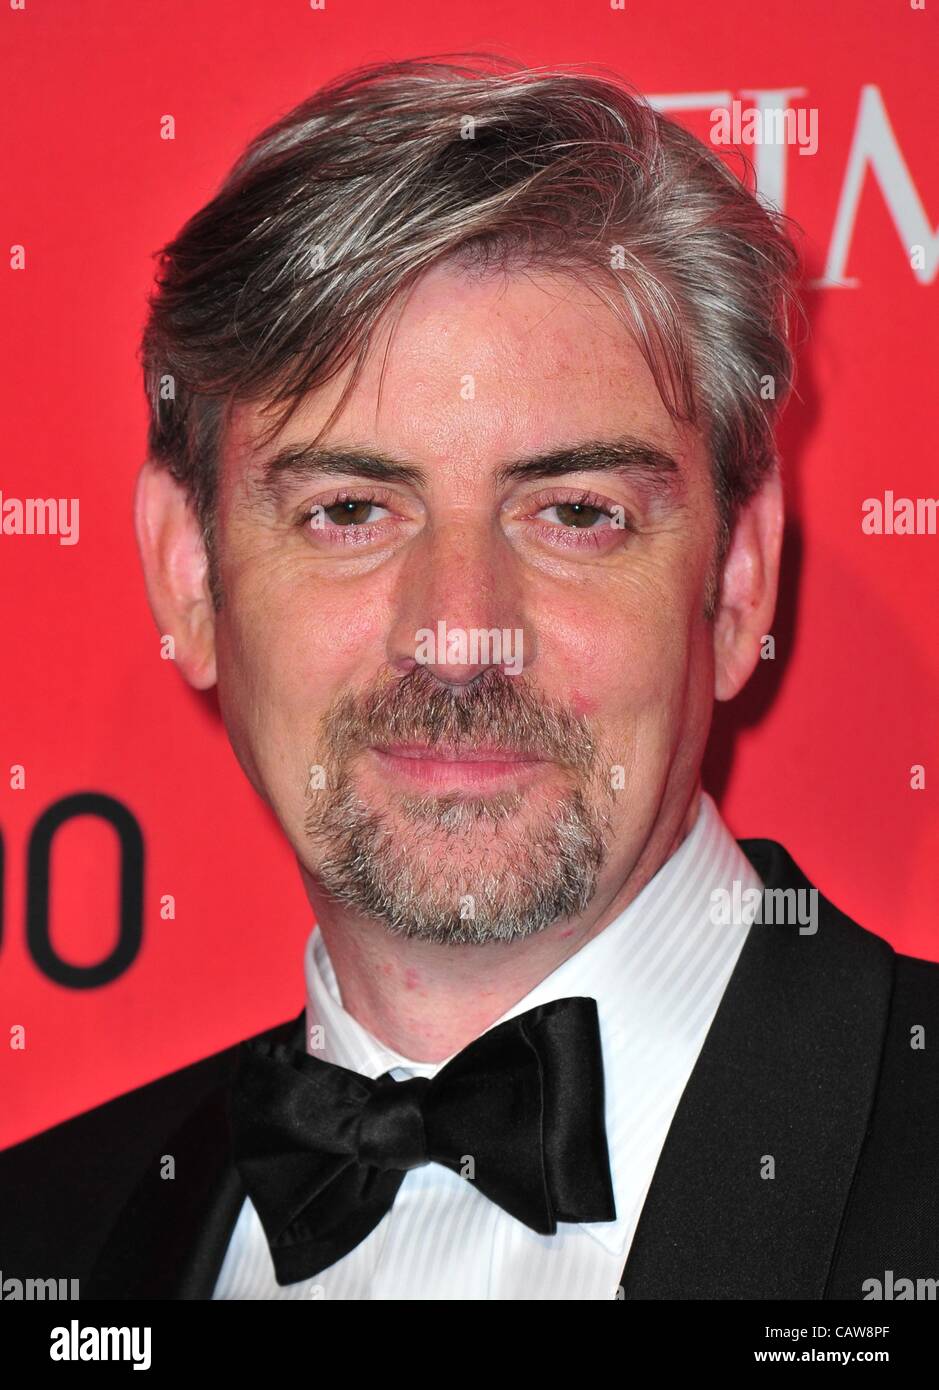 Henrik Scharfe at arrivals for TIME 100 Gala, Frederick P. Rose Hall, Jazz at Lincoln Center, New York, NY April 24, 2012. Photo By: Gregorio T. Binuya/Everett Collection Stock Photo